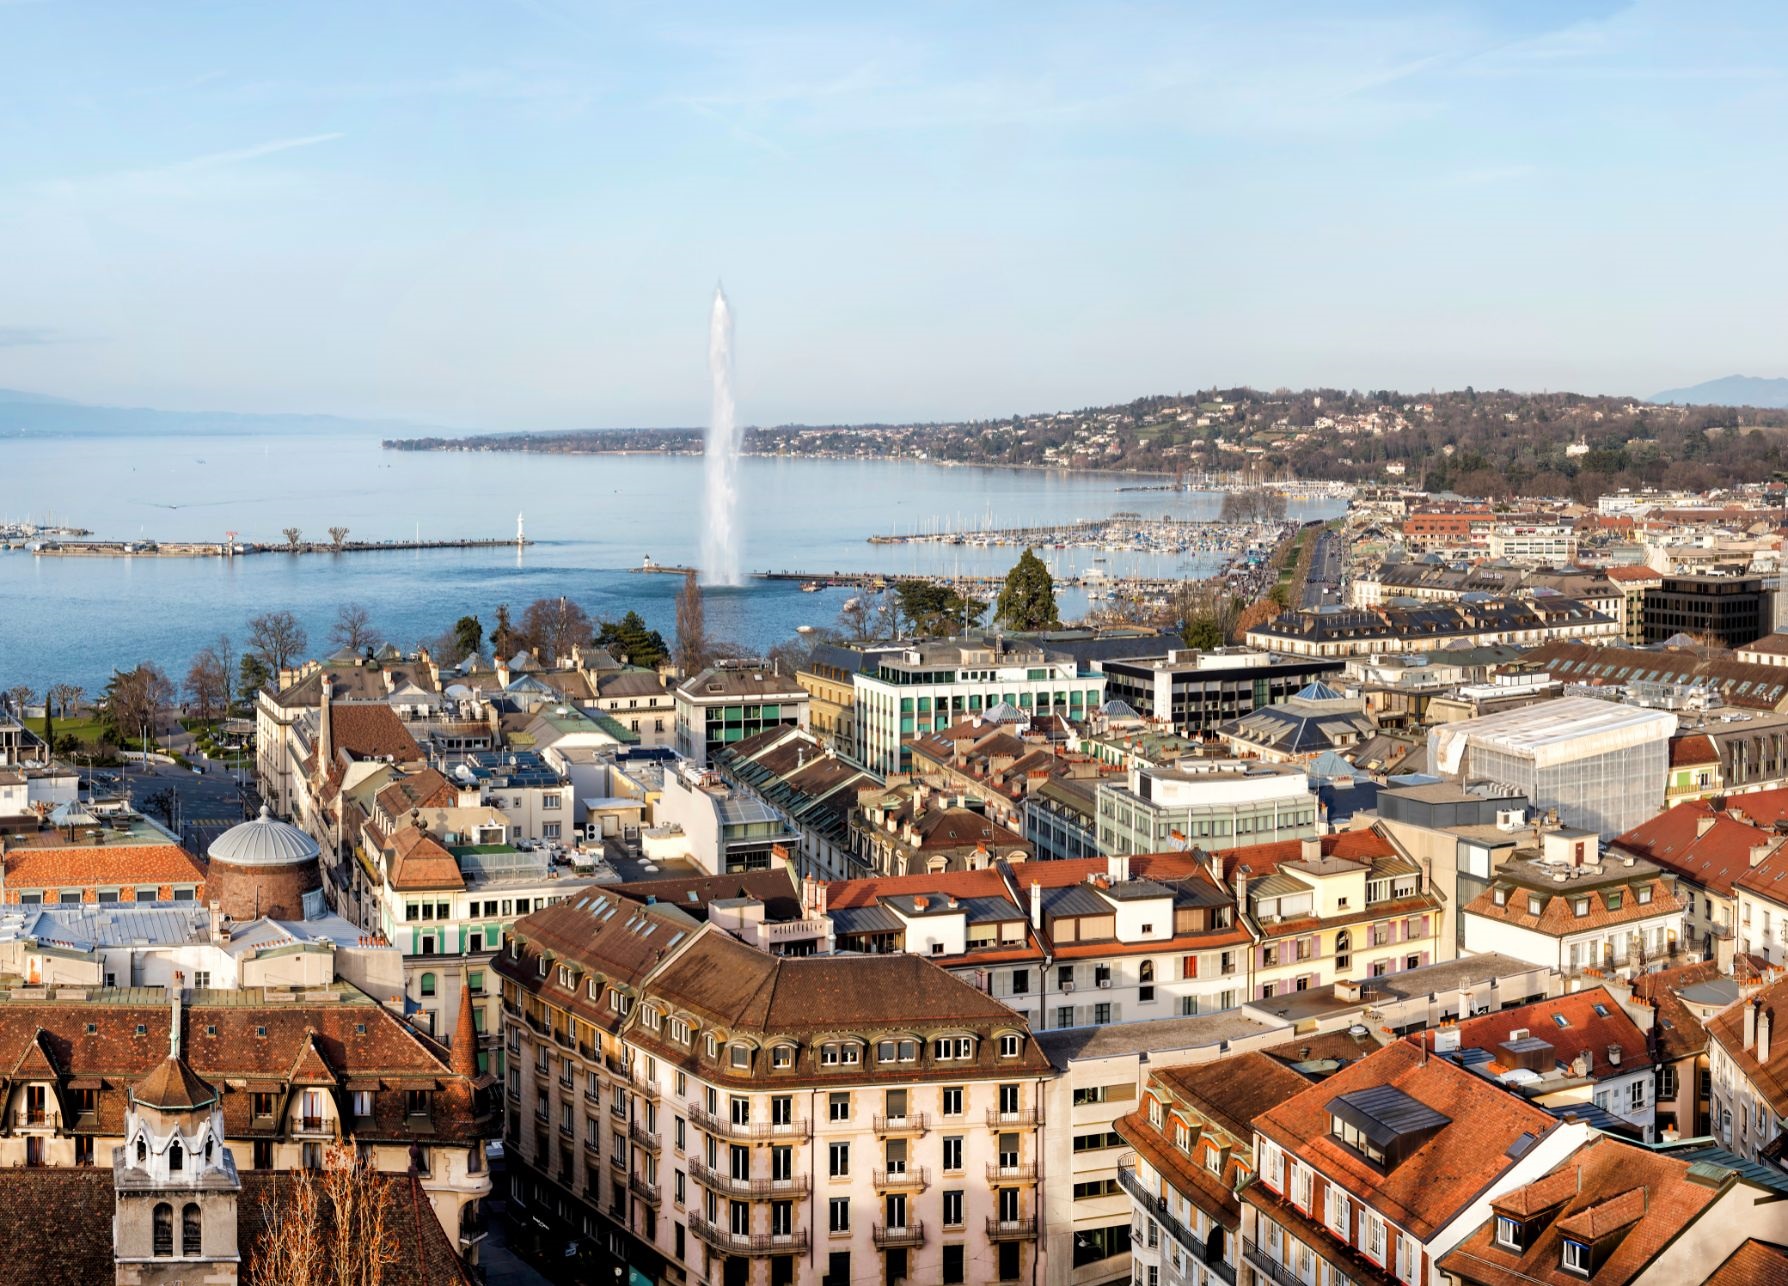 ReloNest offers personalized relocation services for expatriates moving to Geneva, ensuring a smooth transition to life in Switzerland's cosmopolitan city.